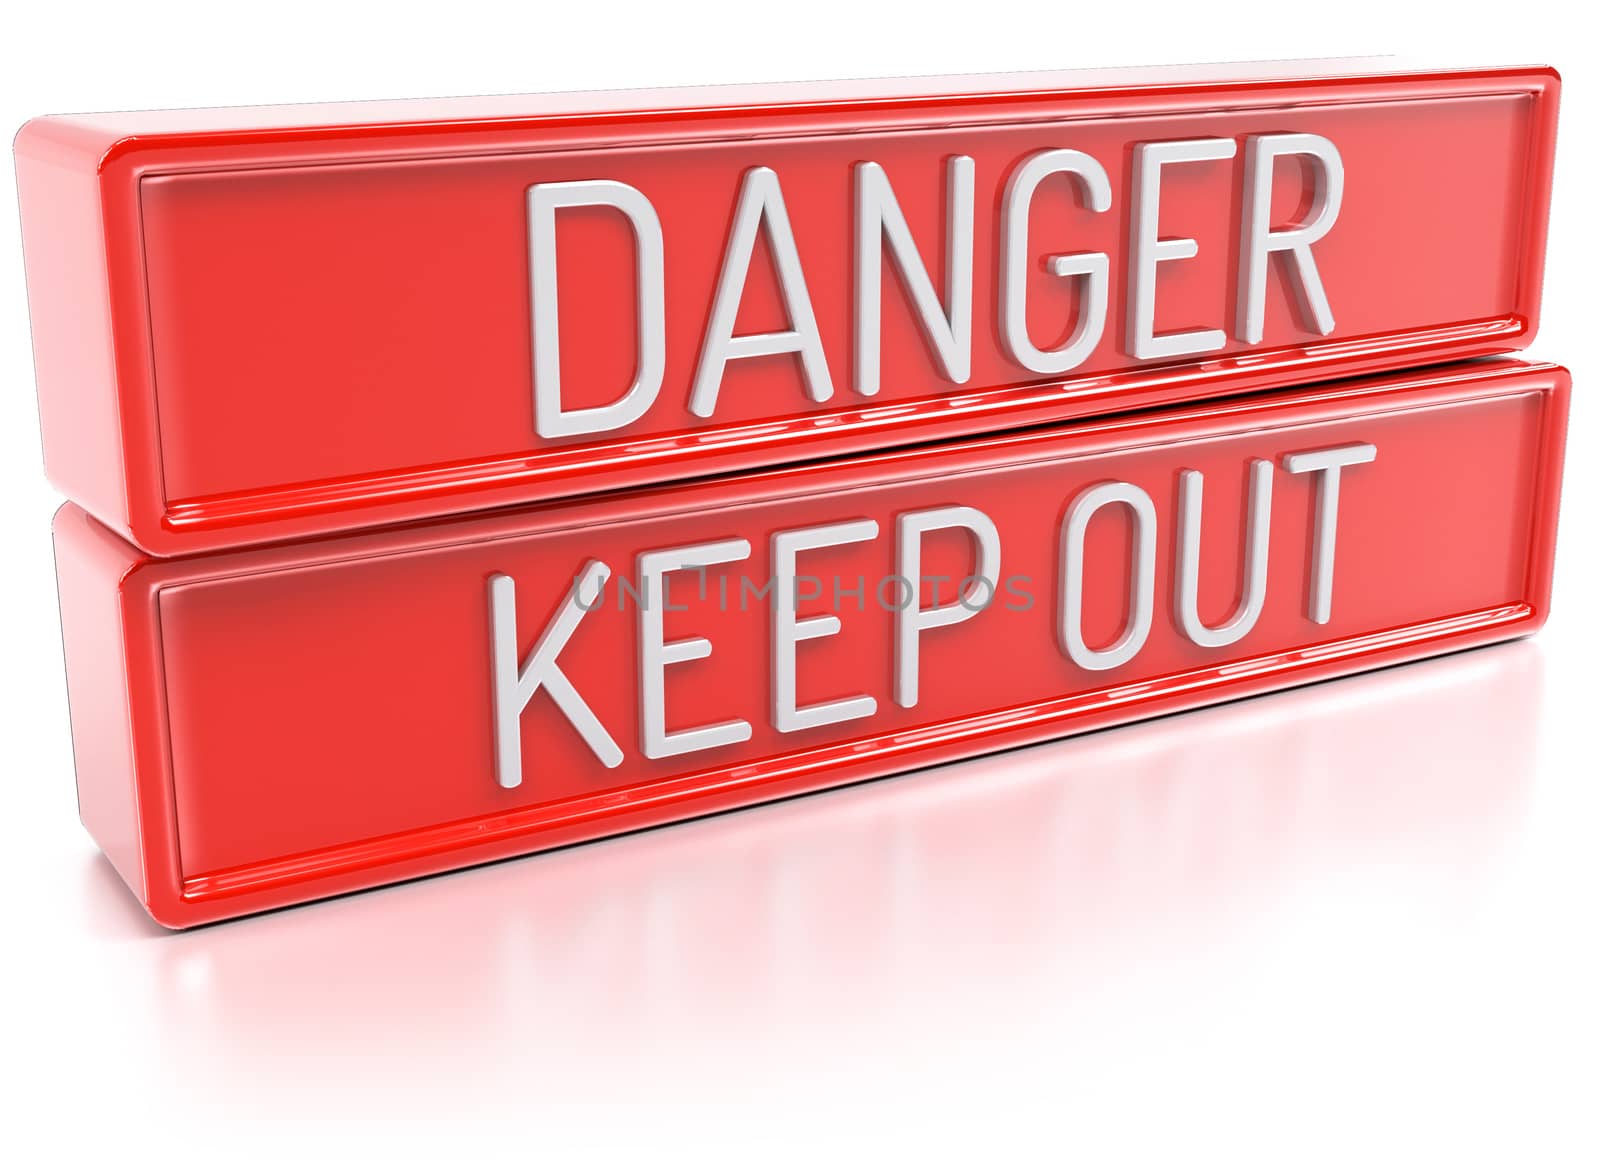 Danger Keep Out - Red banners with text - Isolated 3D Render